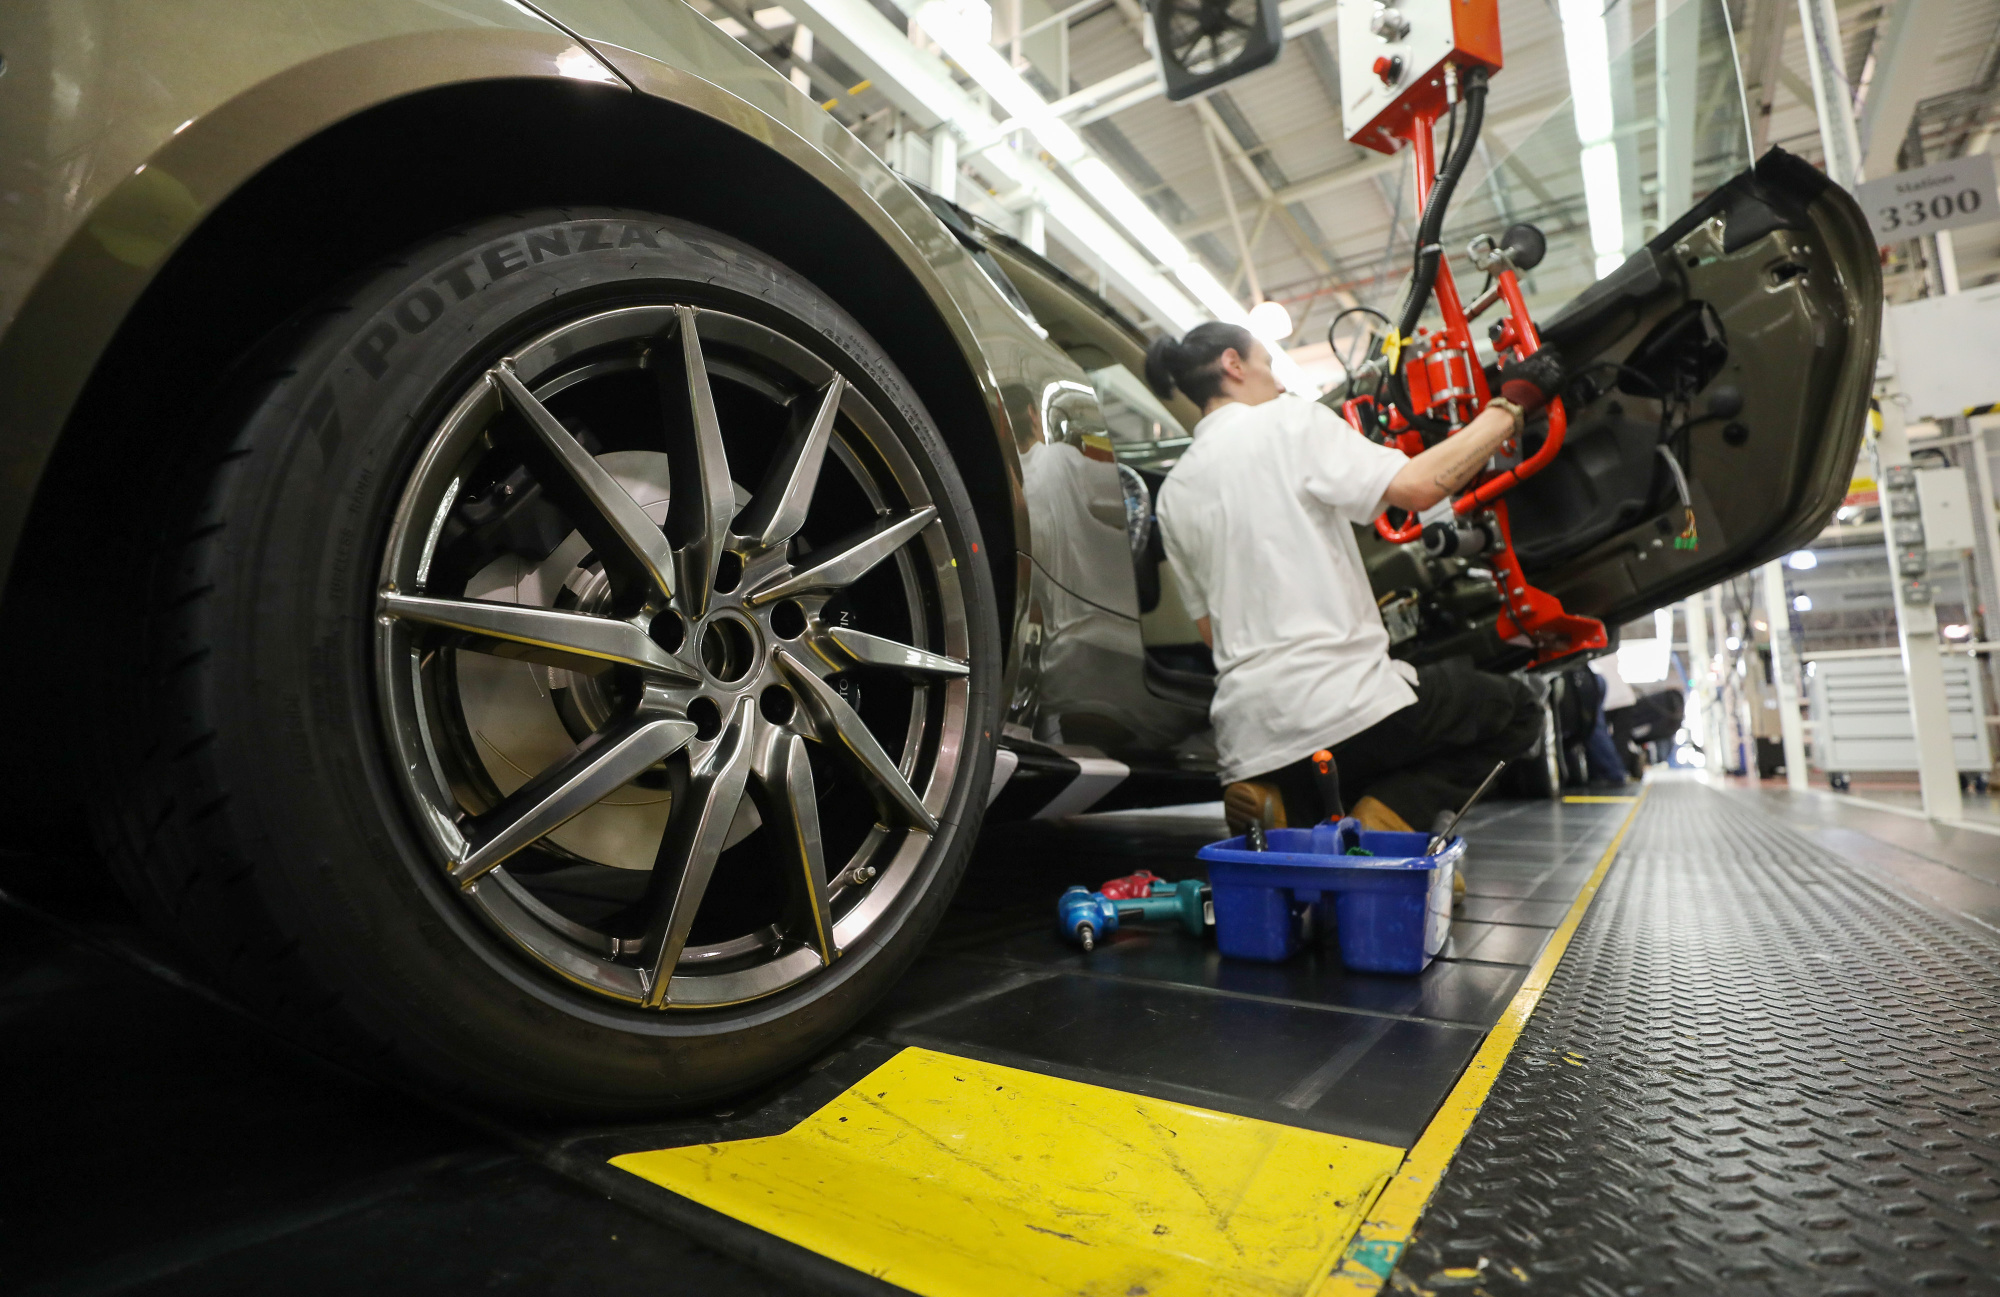 Manufacturing At The Aston Martin Holdings U.K. Ltd. Production Line As Company Considers IPO